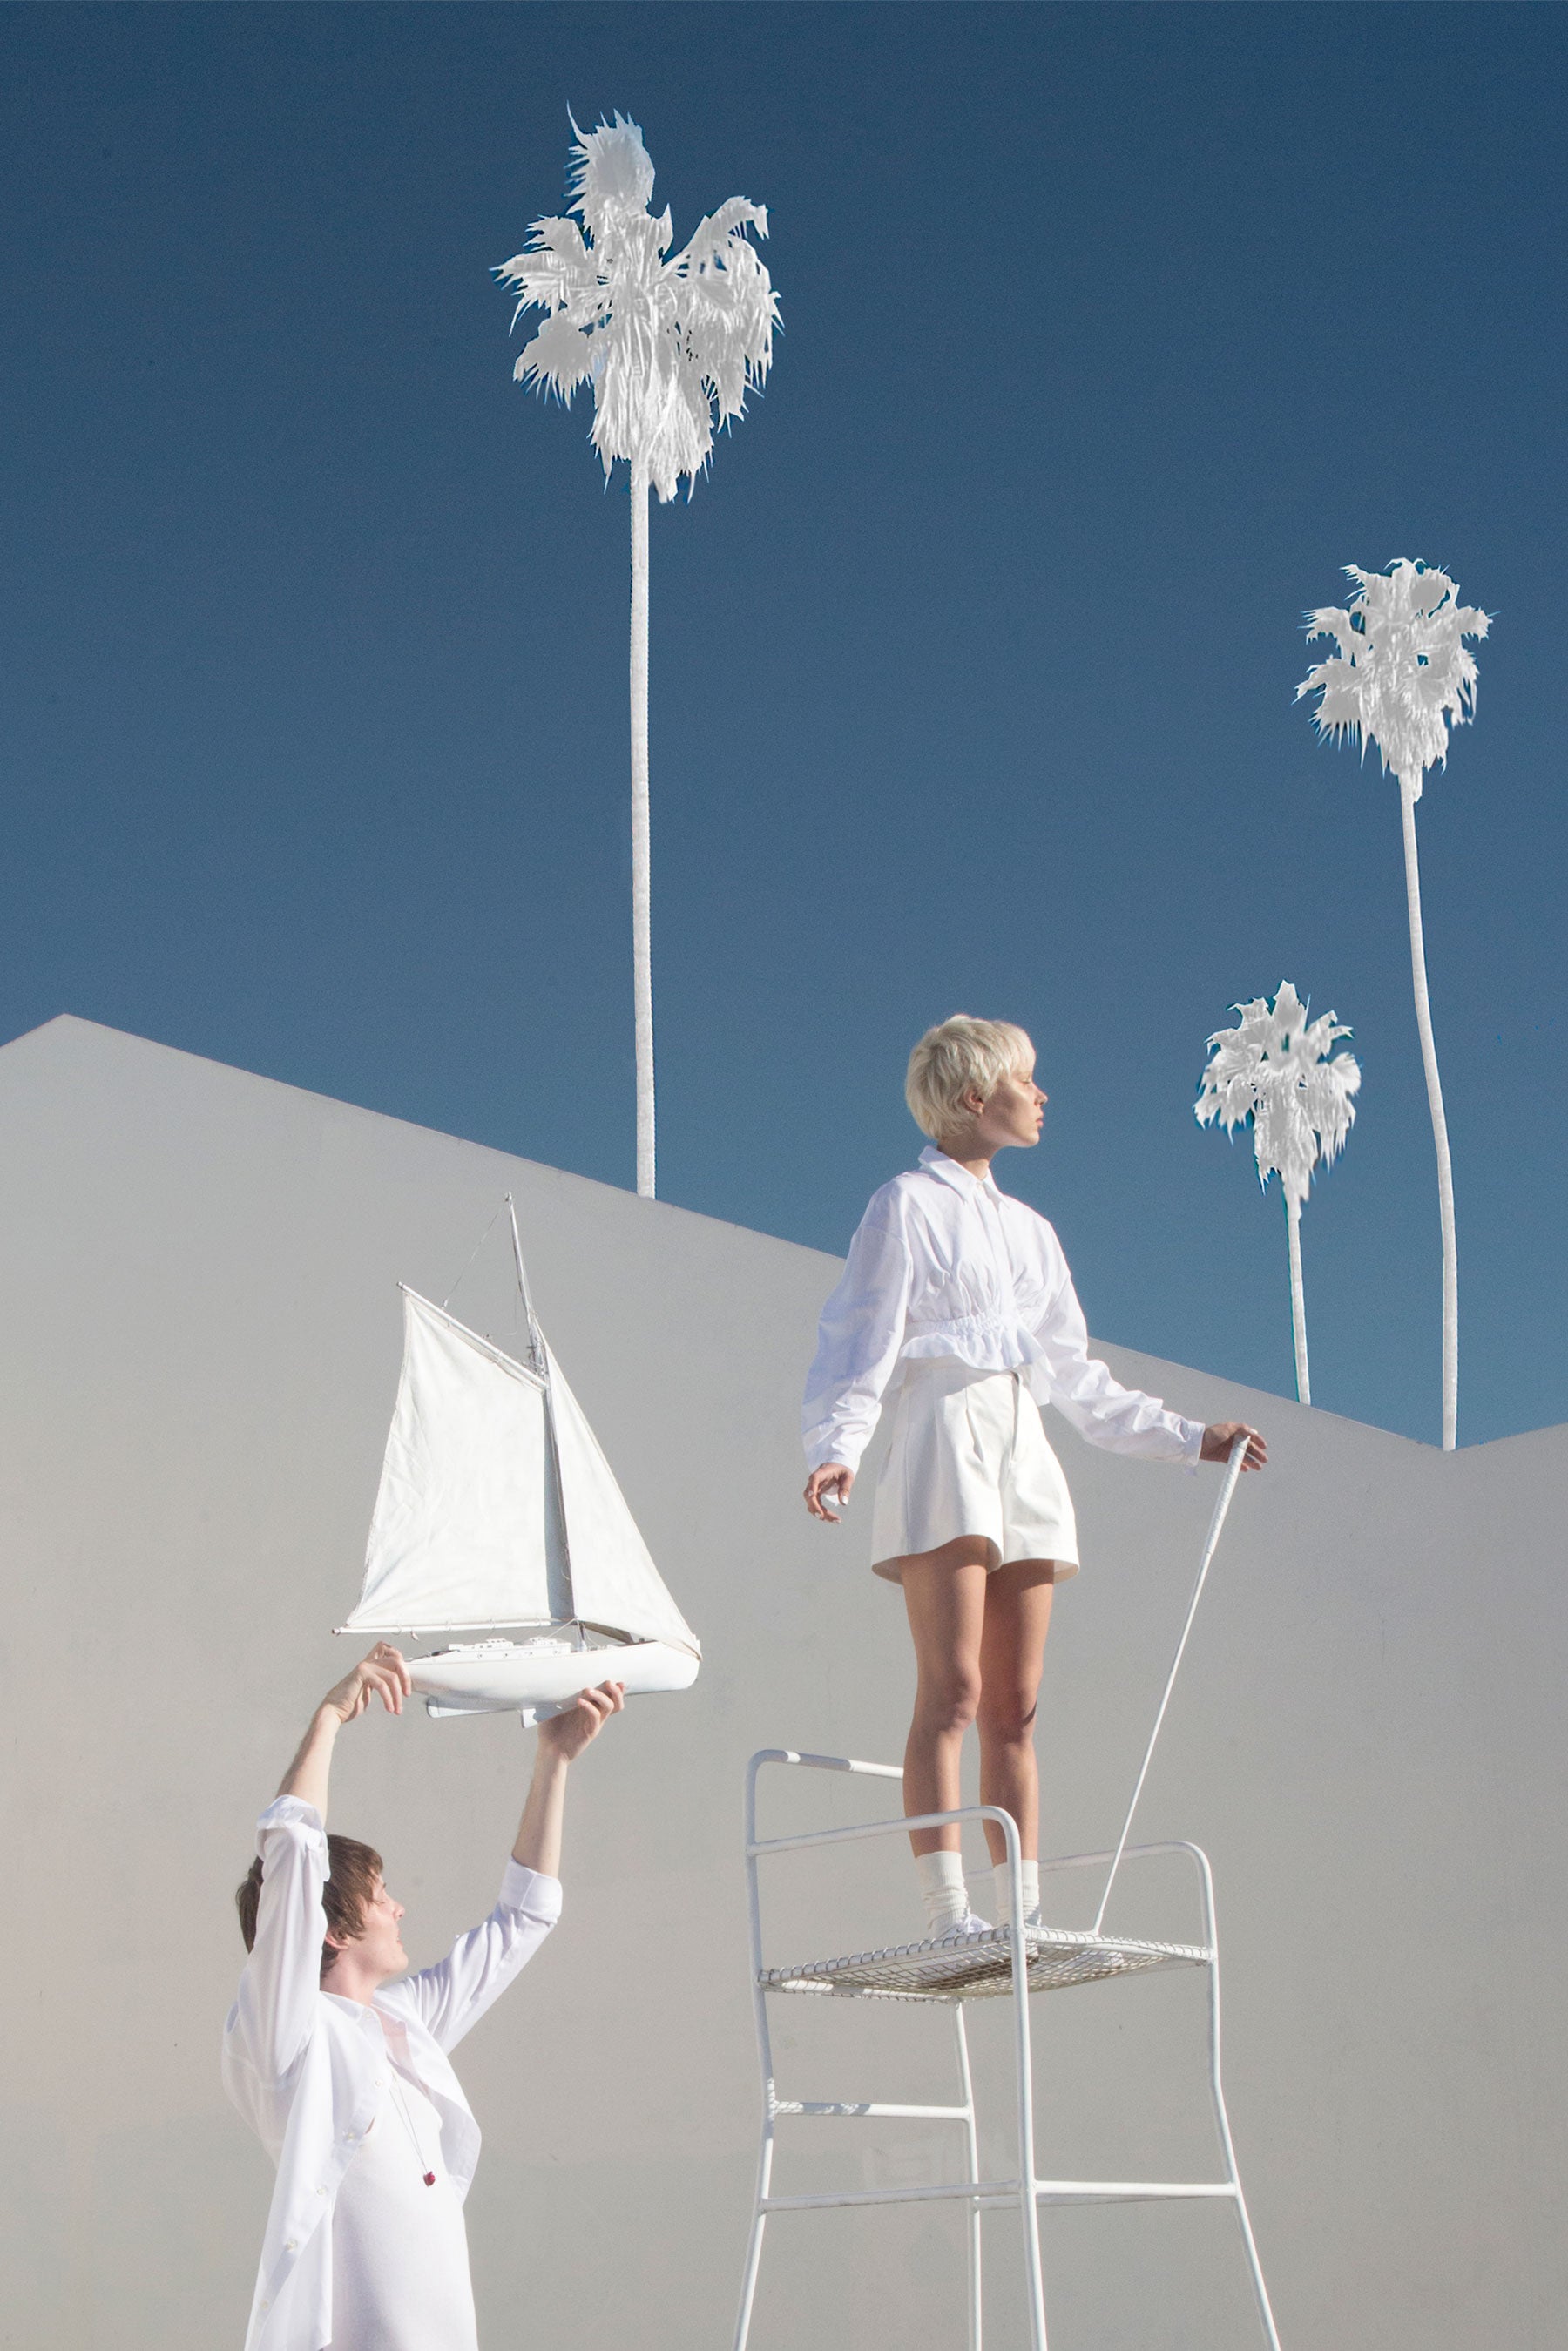 Map of the Heart White v.7 eau de parfum lookbook imagery - Woman stand son high chair looking up to palm trees in sky